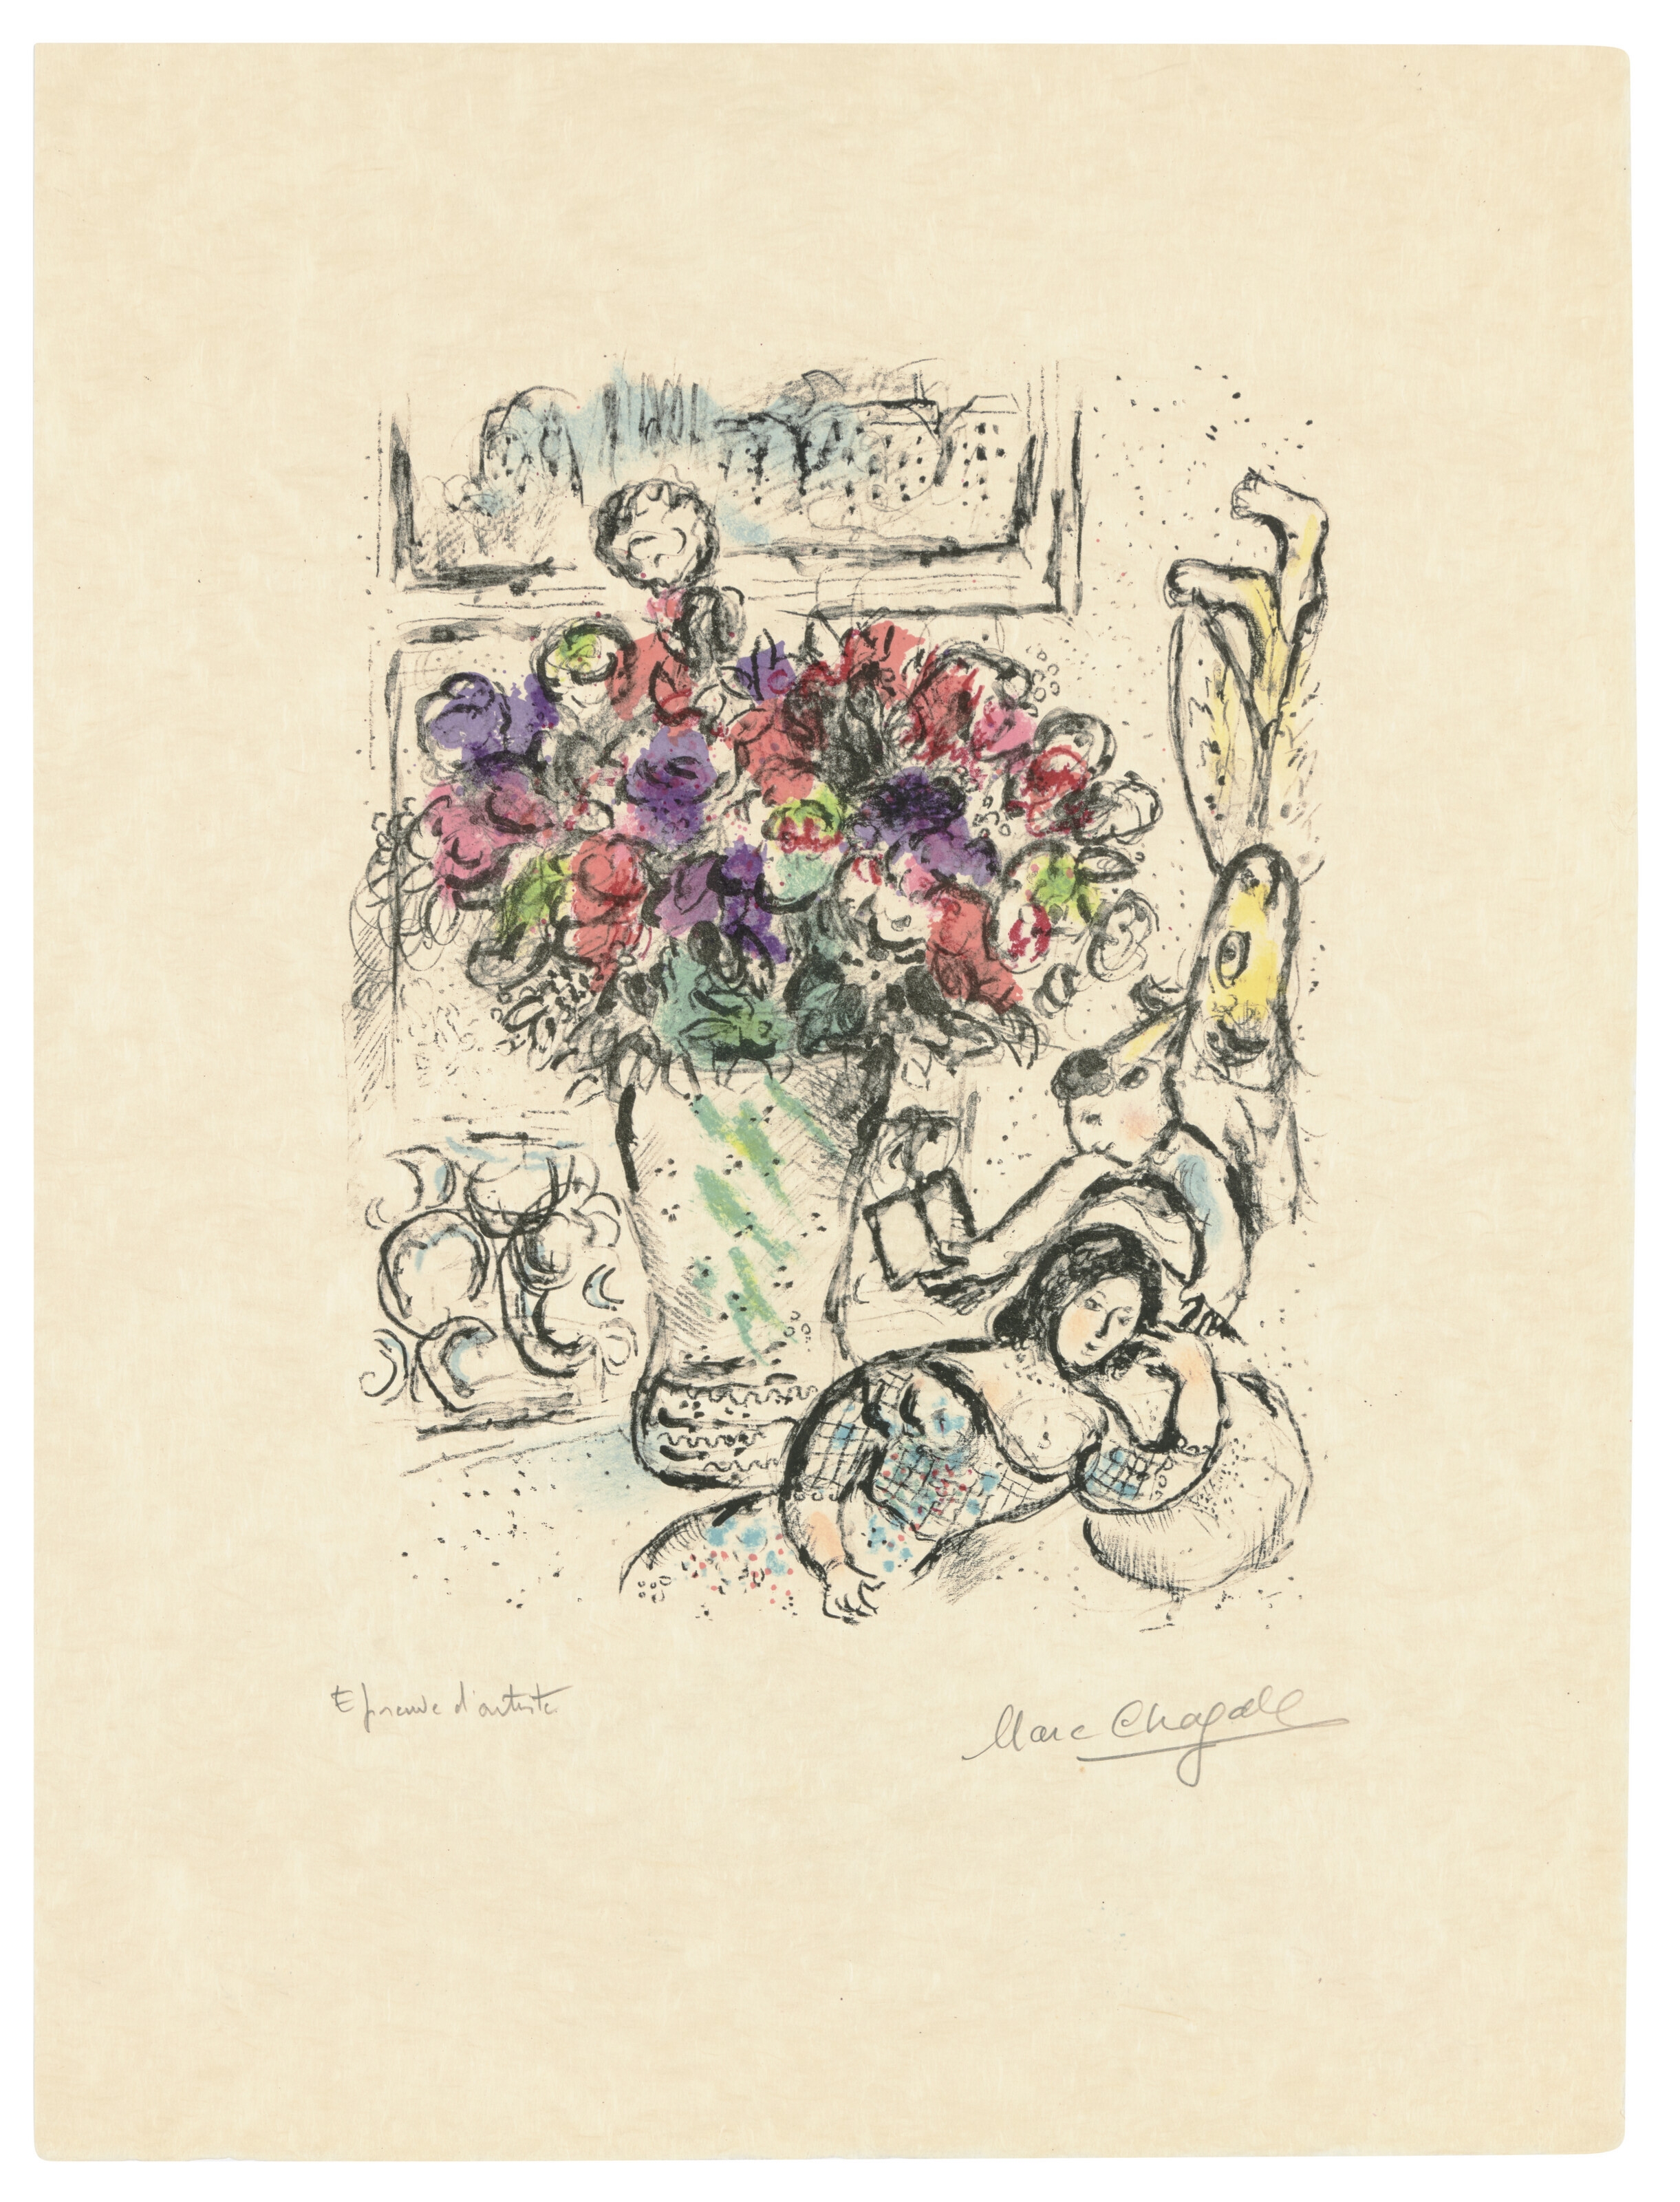 Les Anémones by Marc Chagall, 1974